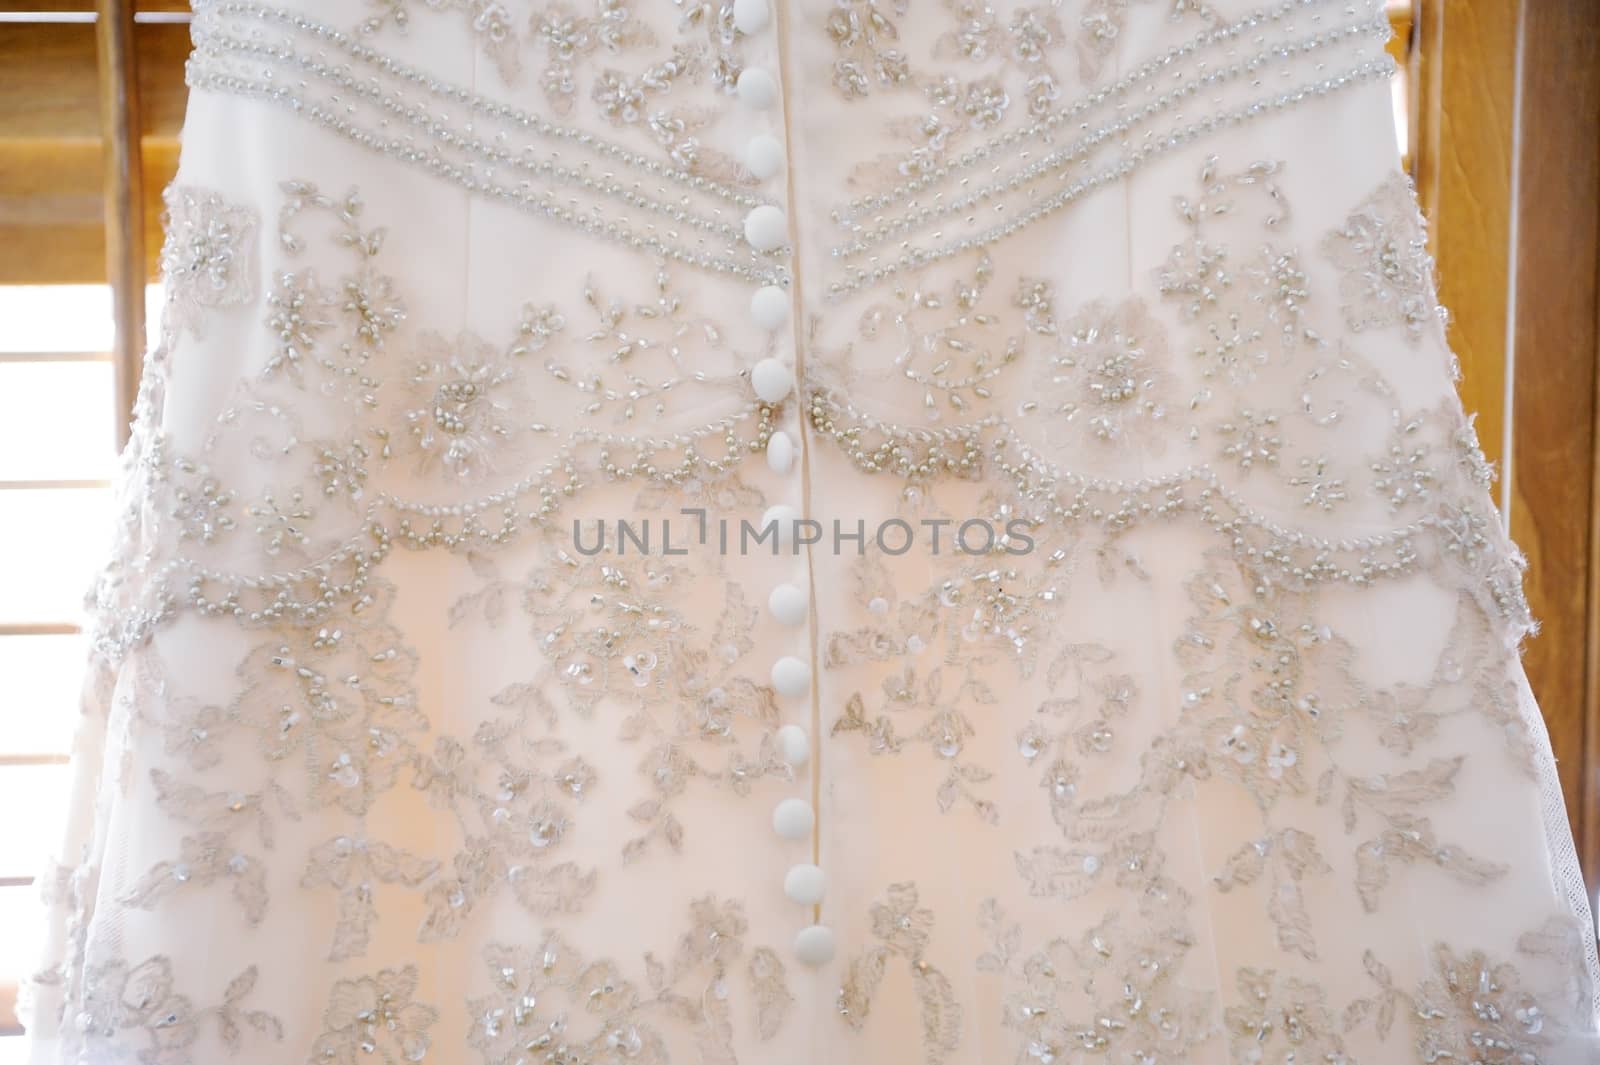 Brides gown close-up by kmwphotography